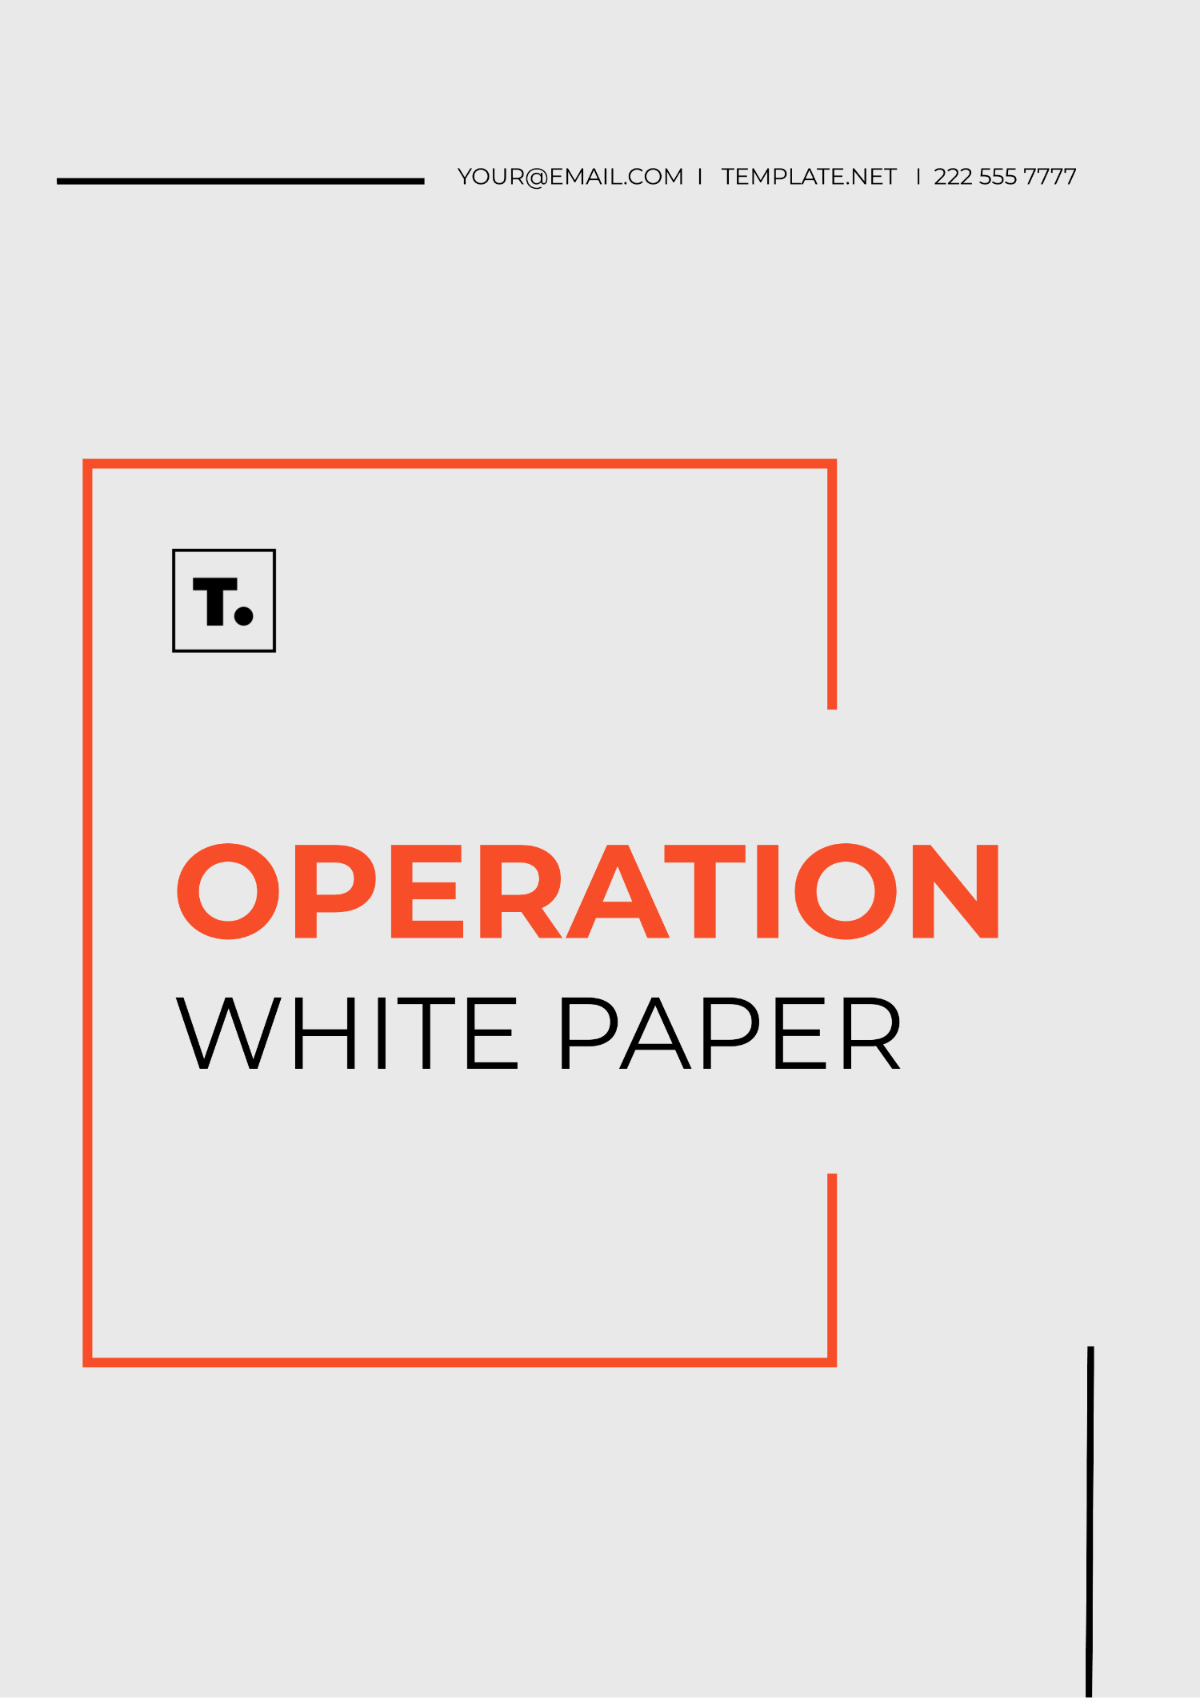 Operation White Paper Template